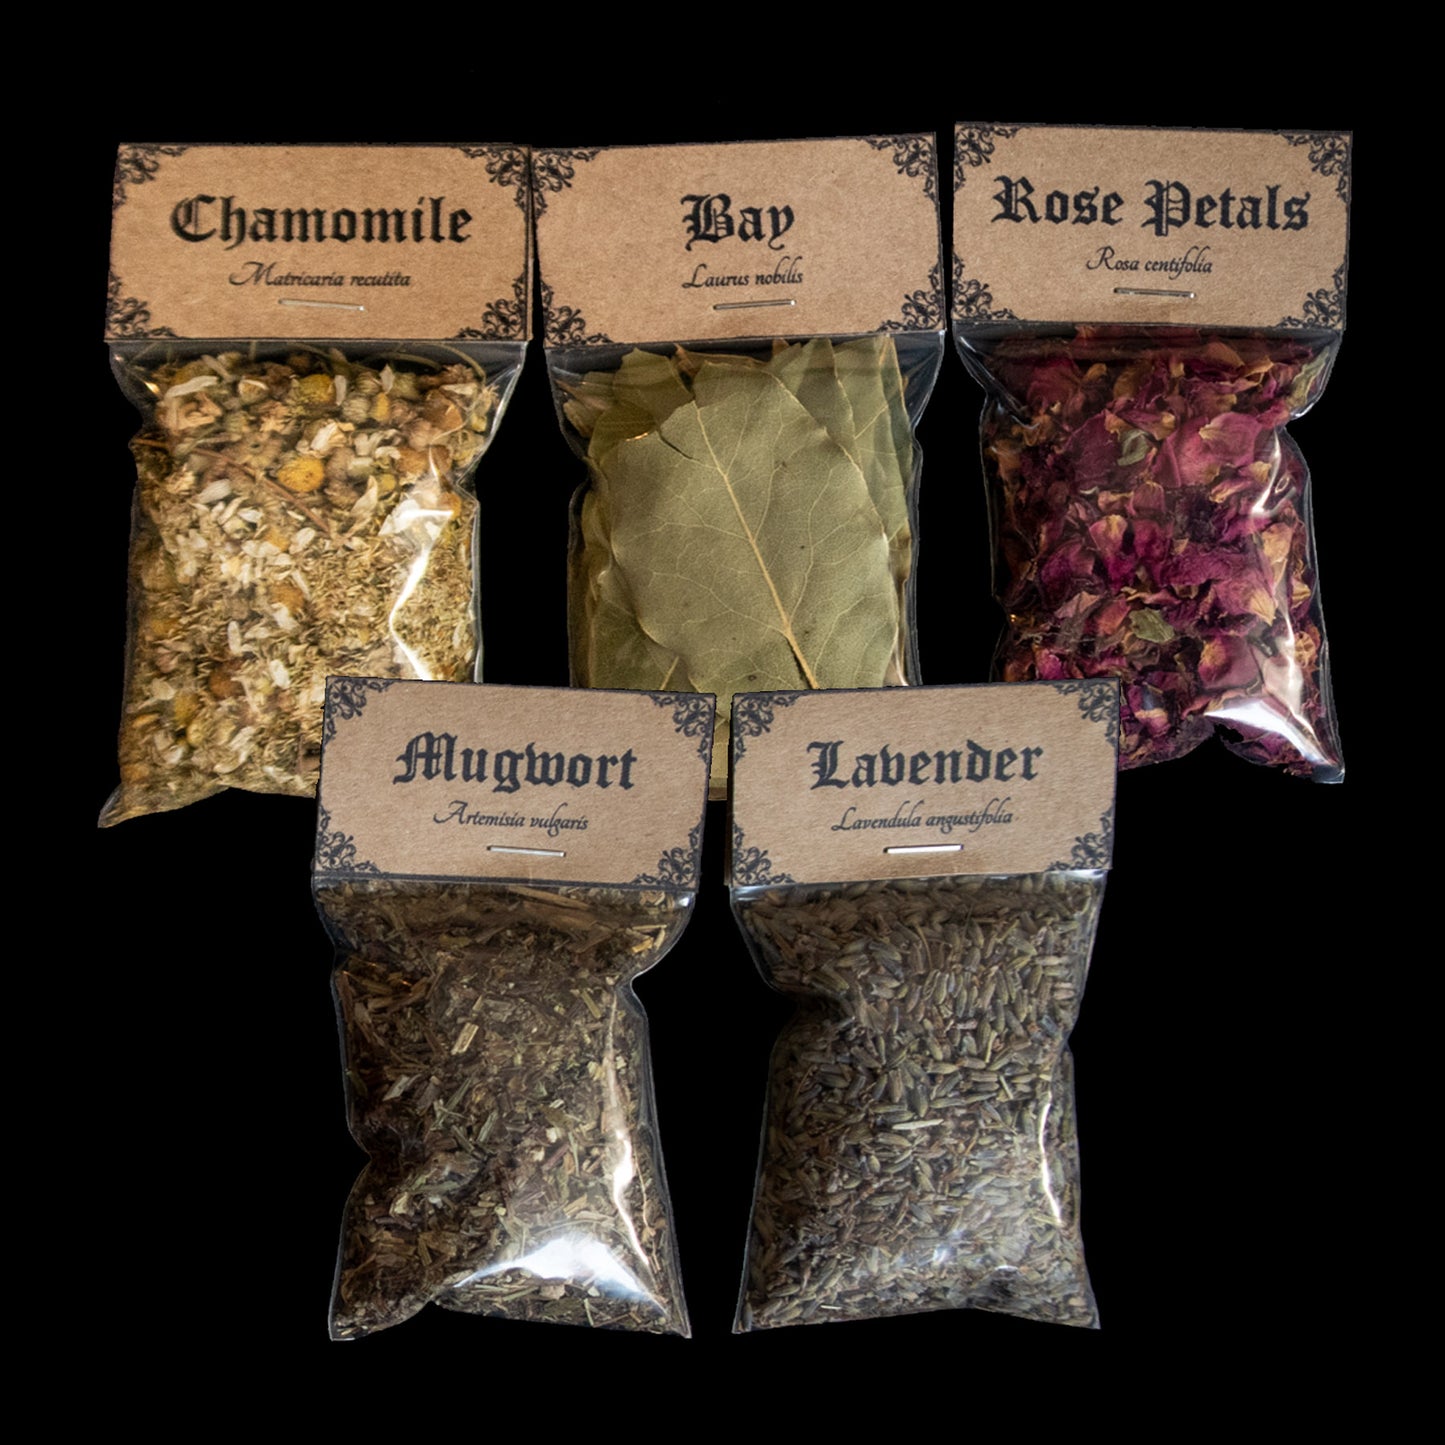 Small Botanical Favourites kit: A collection of 5 bags of herbs - Victorian-apothecary-style brown labels at the top give the common and Latin names